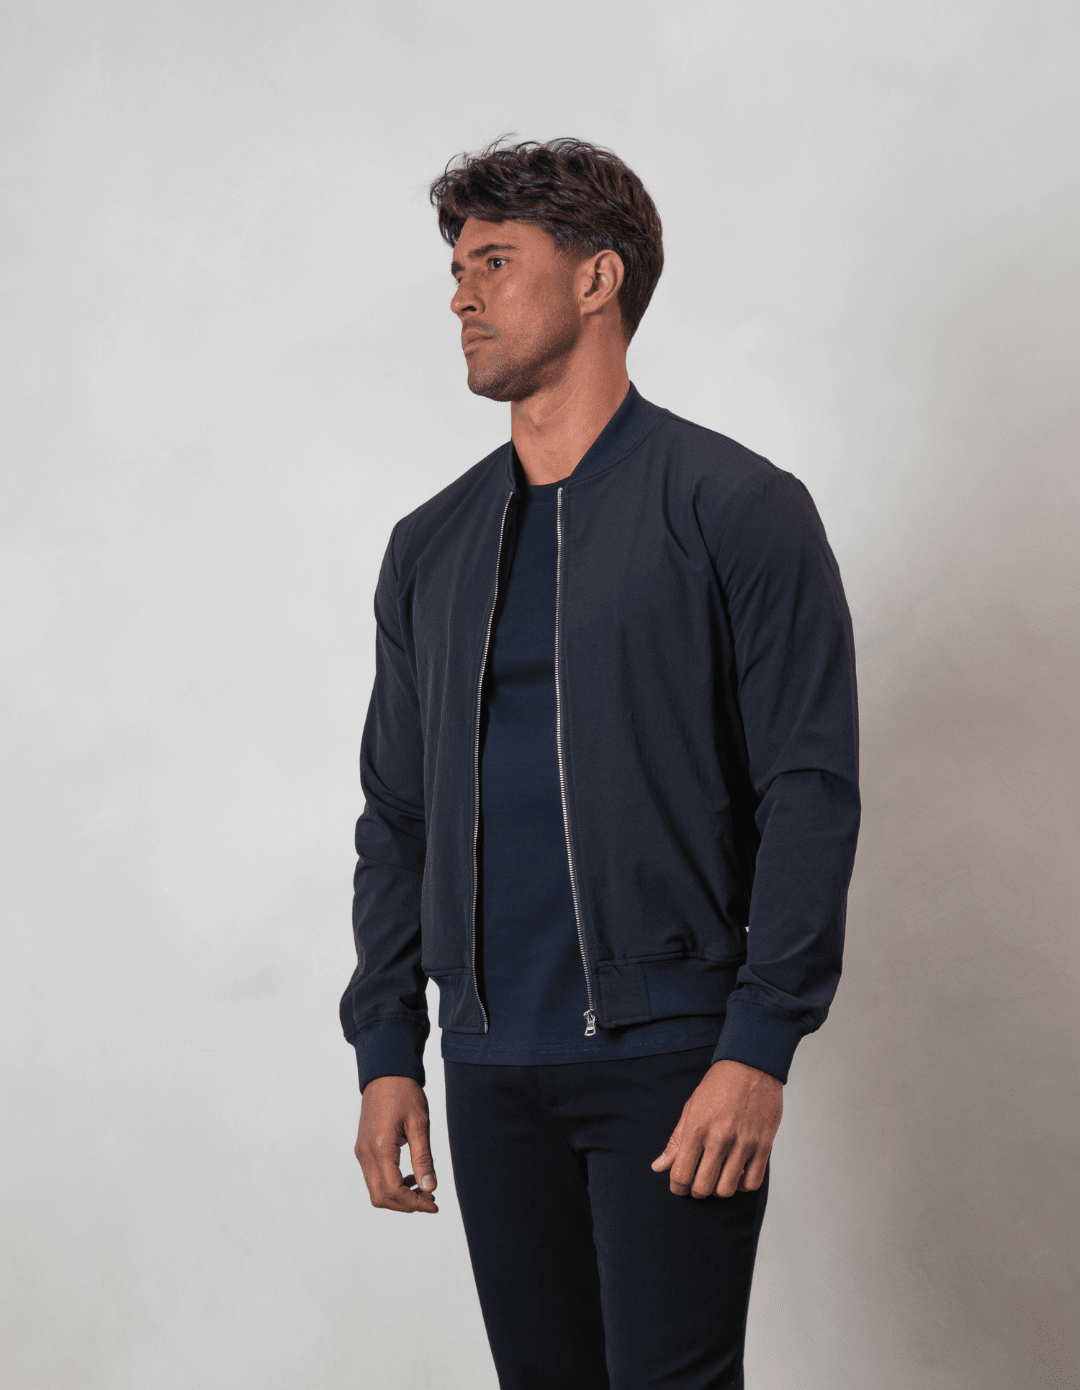 Men's Navy Bomber Jacket | Bomber Jackets For Men | Expand your ...